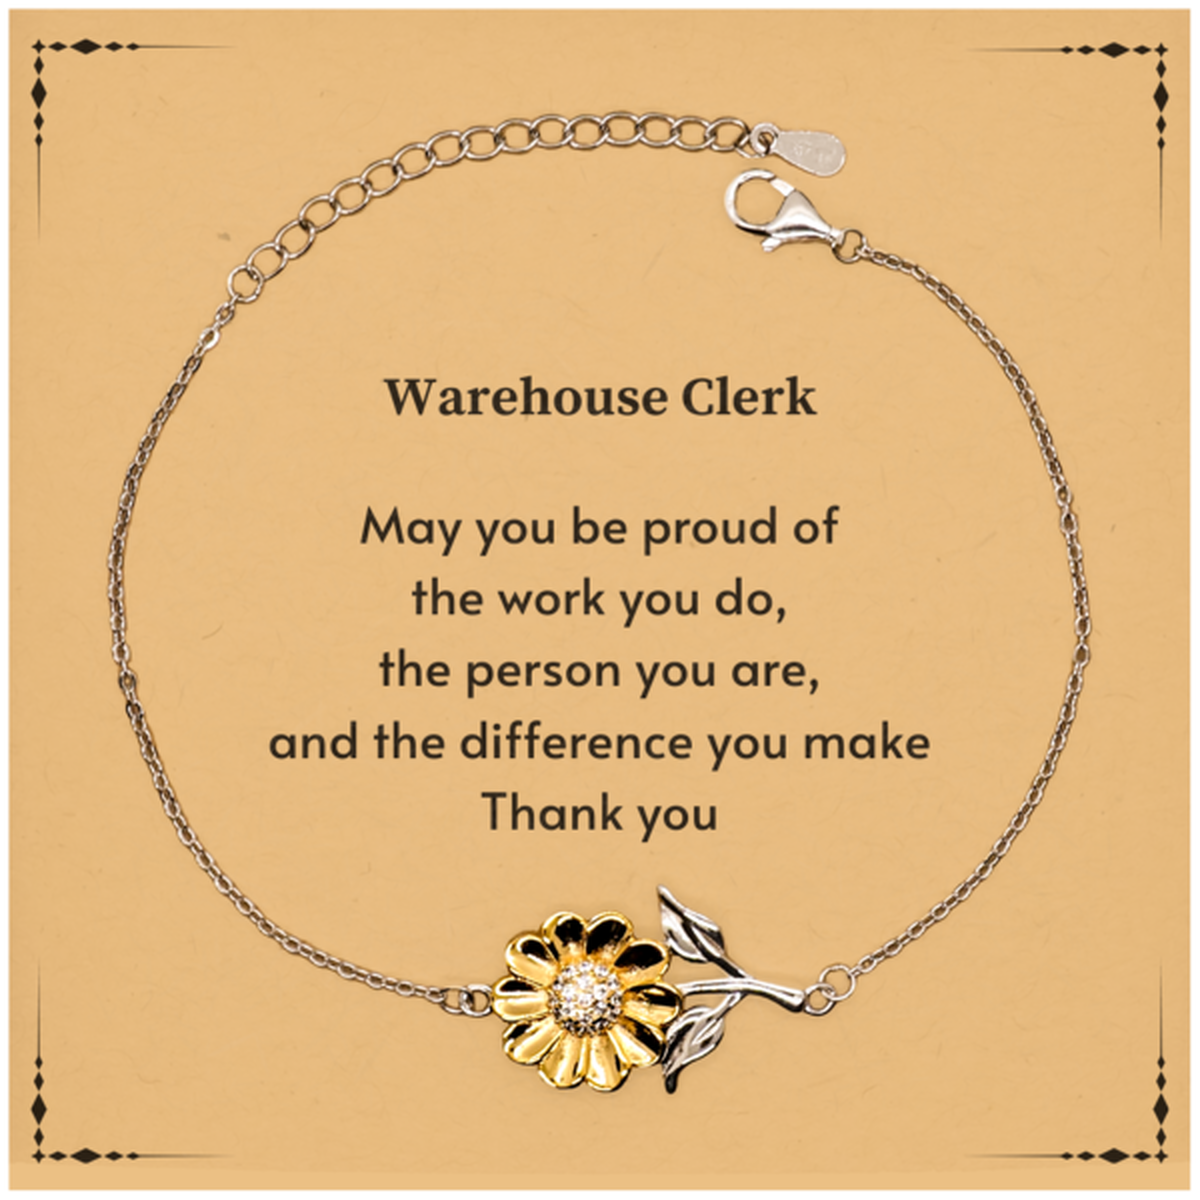 Heartwarming Sunflower Bracelet Retirement Coworkers Gifts for Warehouse Clerk, Warehouse Clerk May You be proud of the work you do, the person you are Gifts for Boss Men Women Friends